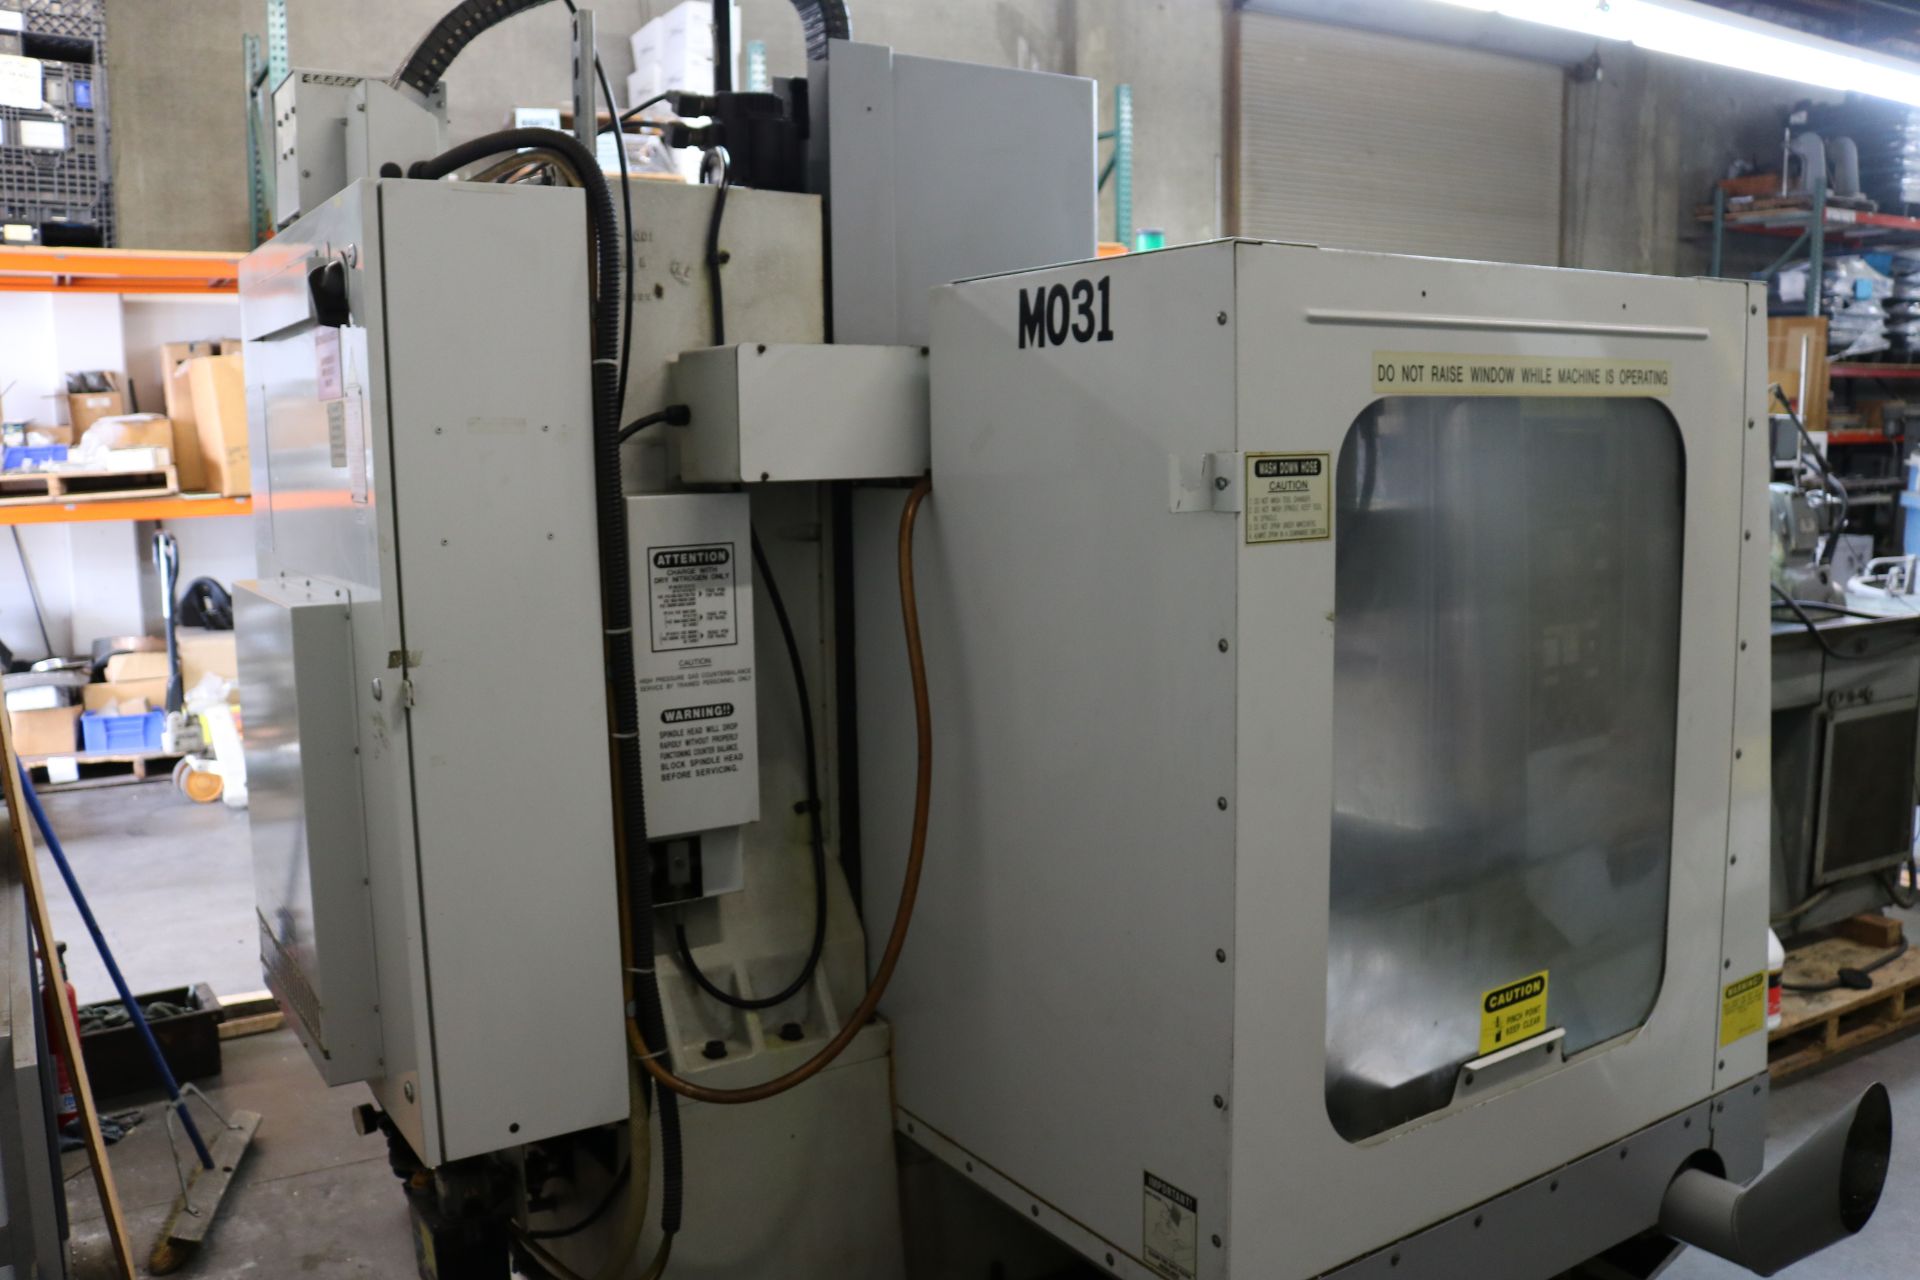 1999 HAAS VERTICAL MILL, MODEL VF-2, TRAVELS: 30" X 16" X 20", 36" X 14" TABLE, 10,000 RPM - Image 19 of 21